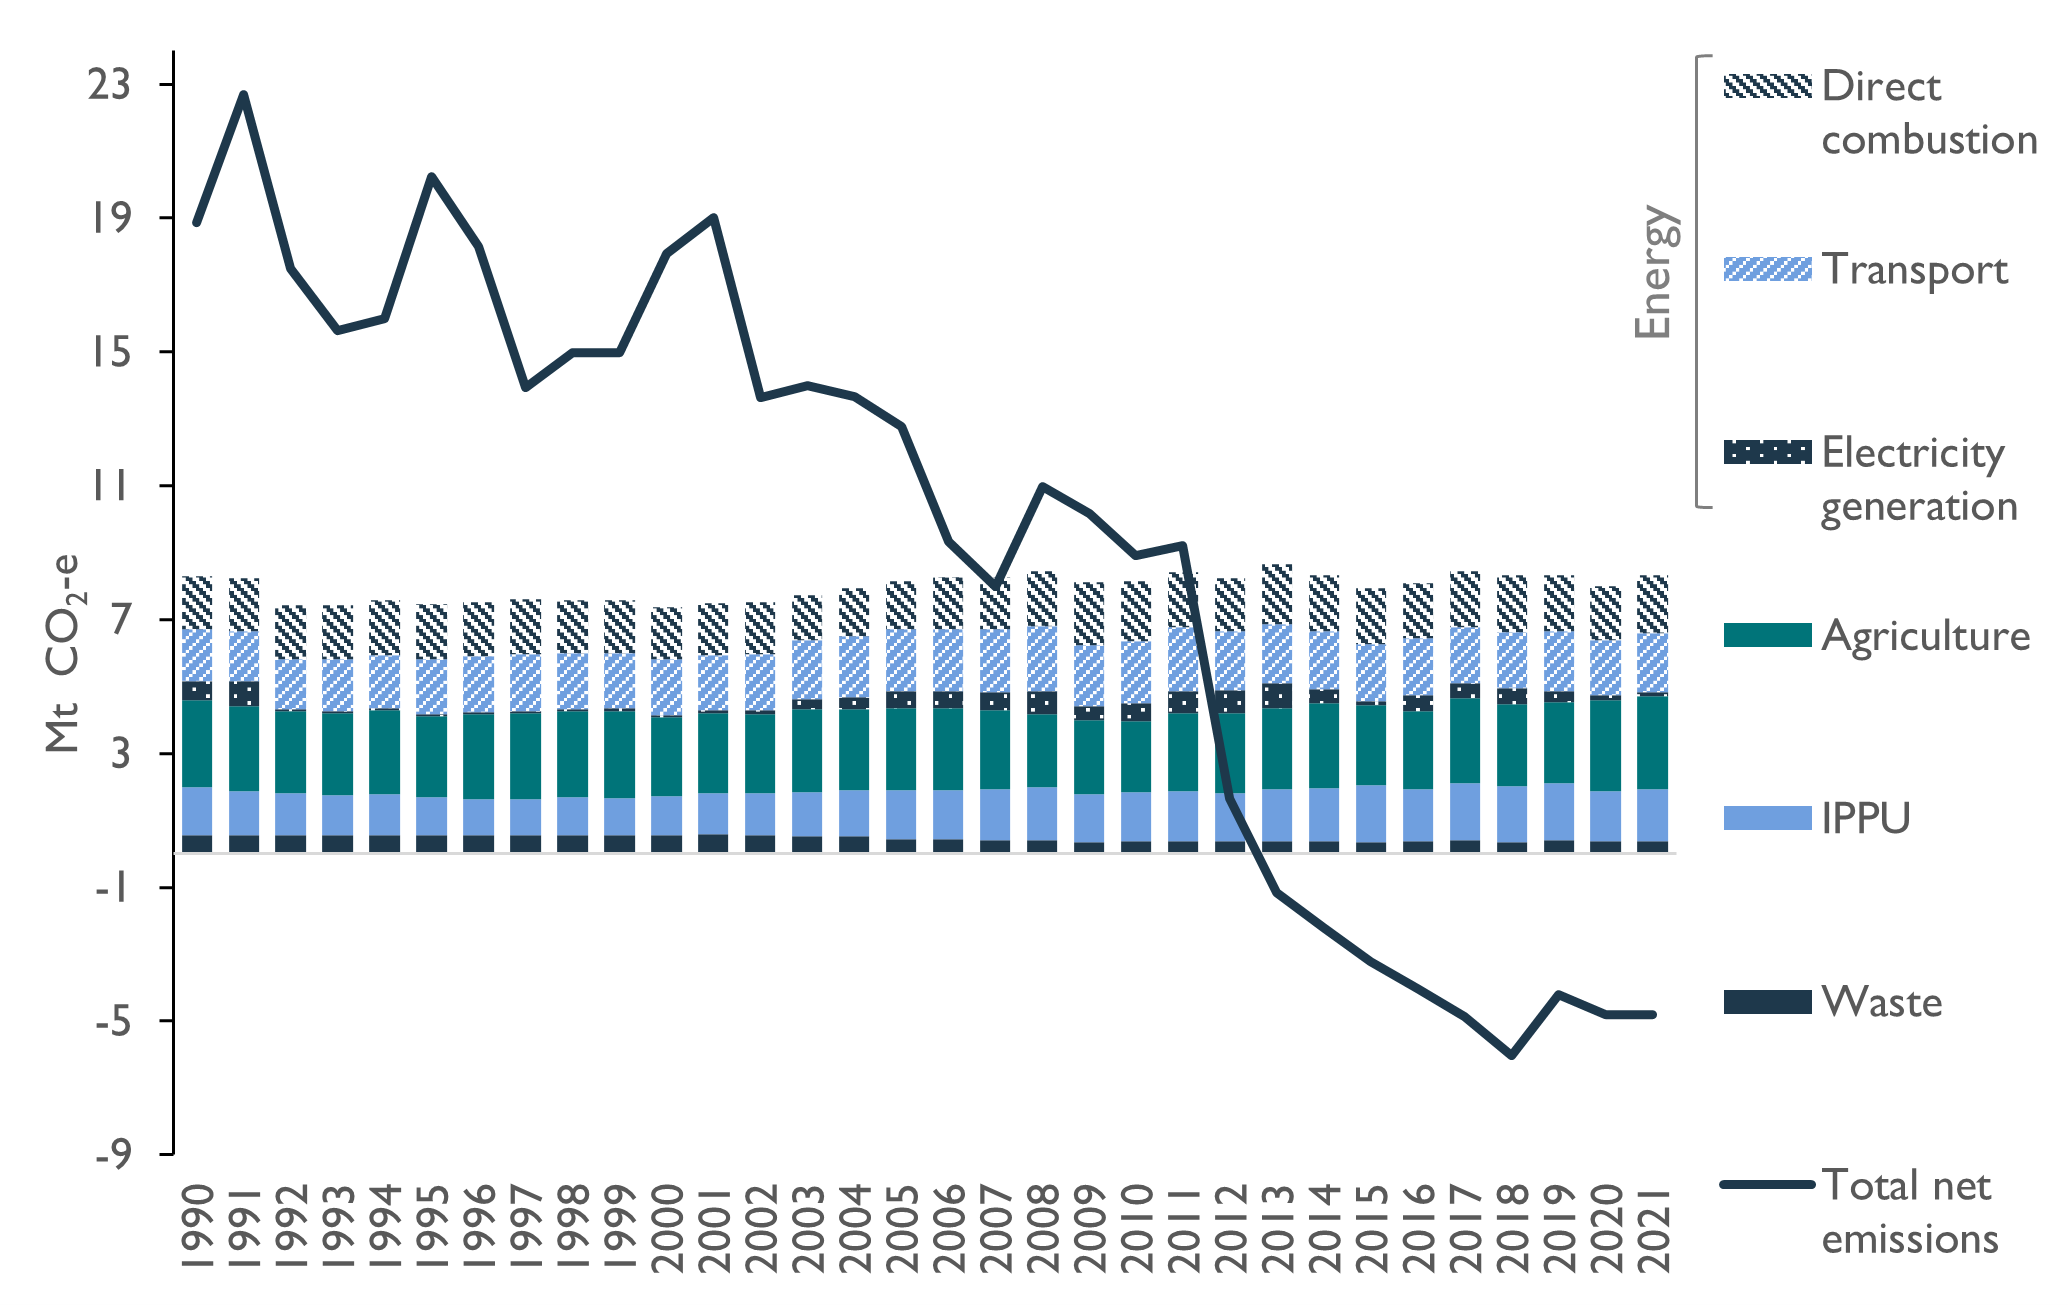 This figure combines a stacked bar chart, showing the change in sectoral and energy sub-sectoral annual greenhouse gas emissions, excluding the LULUCF sector, with a line graph showing total net emissions, from 1990 to 2021. Without emissions from the LULUCF sector, it is clearer to see that Tasmania’s emissions from all other sectors have remained constant. It shows emissions from electricity generation fluctuating year by year, with a minor trend of increasing emissions in industrial processes and product use (IPPU), direct combustion, agriculture and transport, while emissions from waste have decreased.